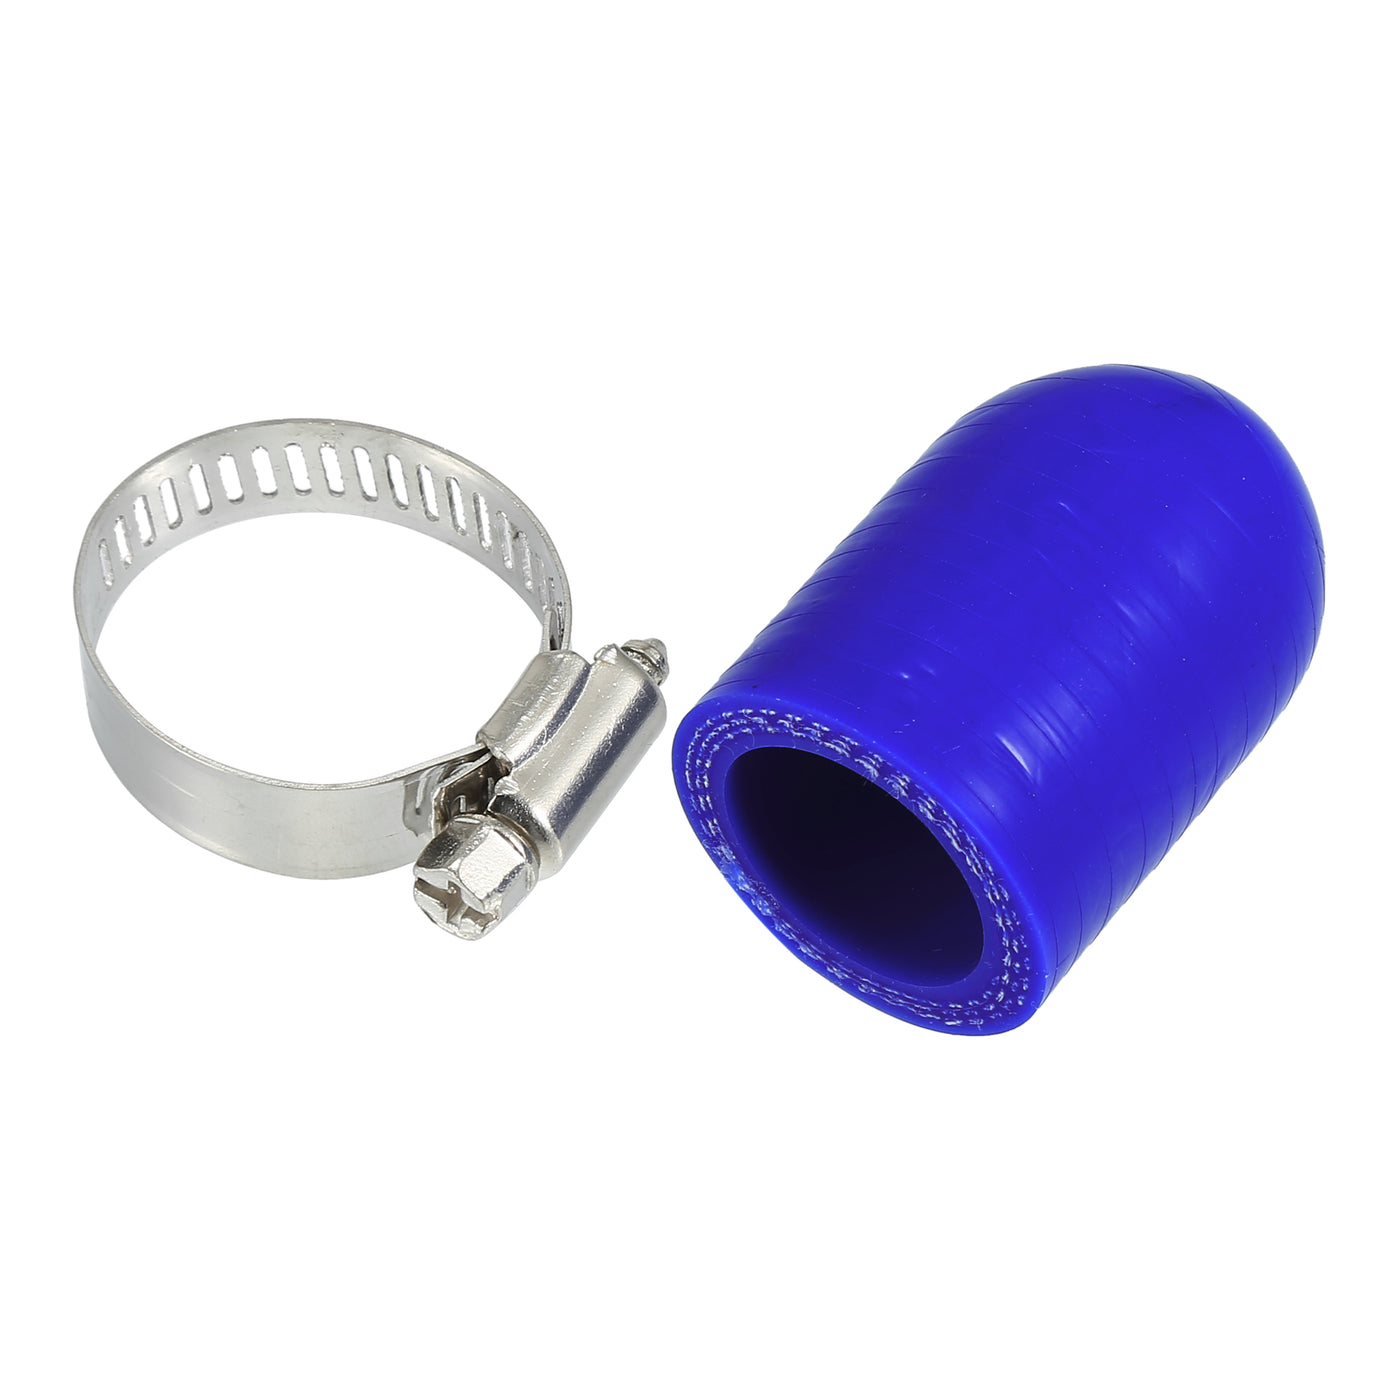 X AUTOHAUX 1 Set 30mm Length 22mm/0.87" ID Blue Car Silicone Rubber Hose End Cap with Clamps Silicone Reinforced Blanking Cap for Bypass Tube Universal